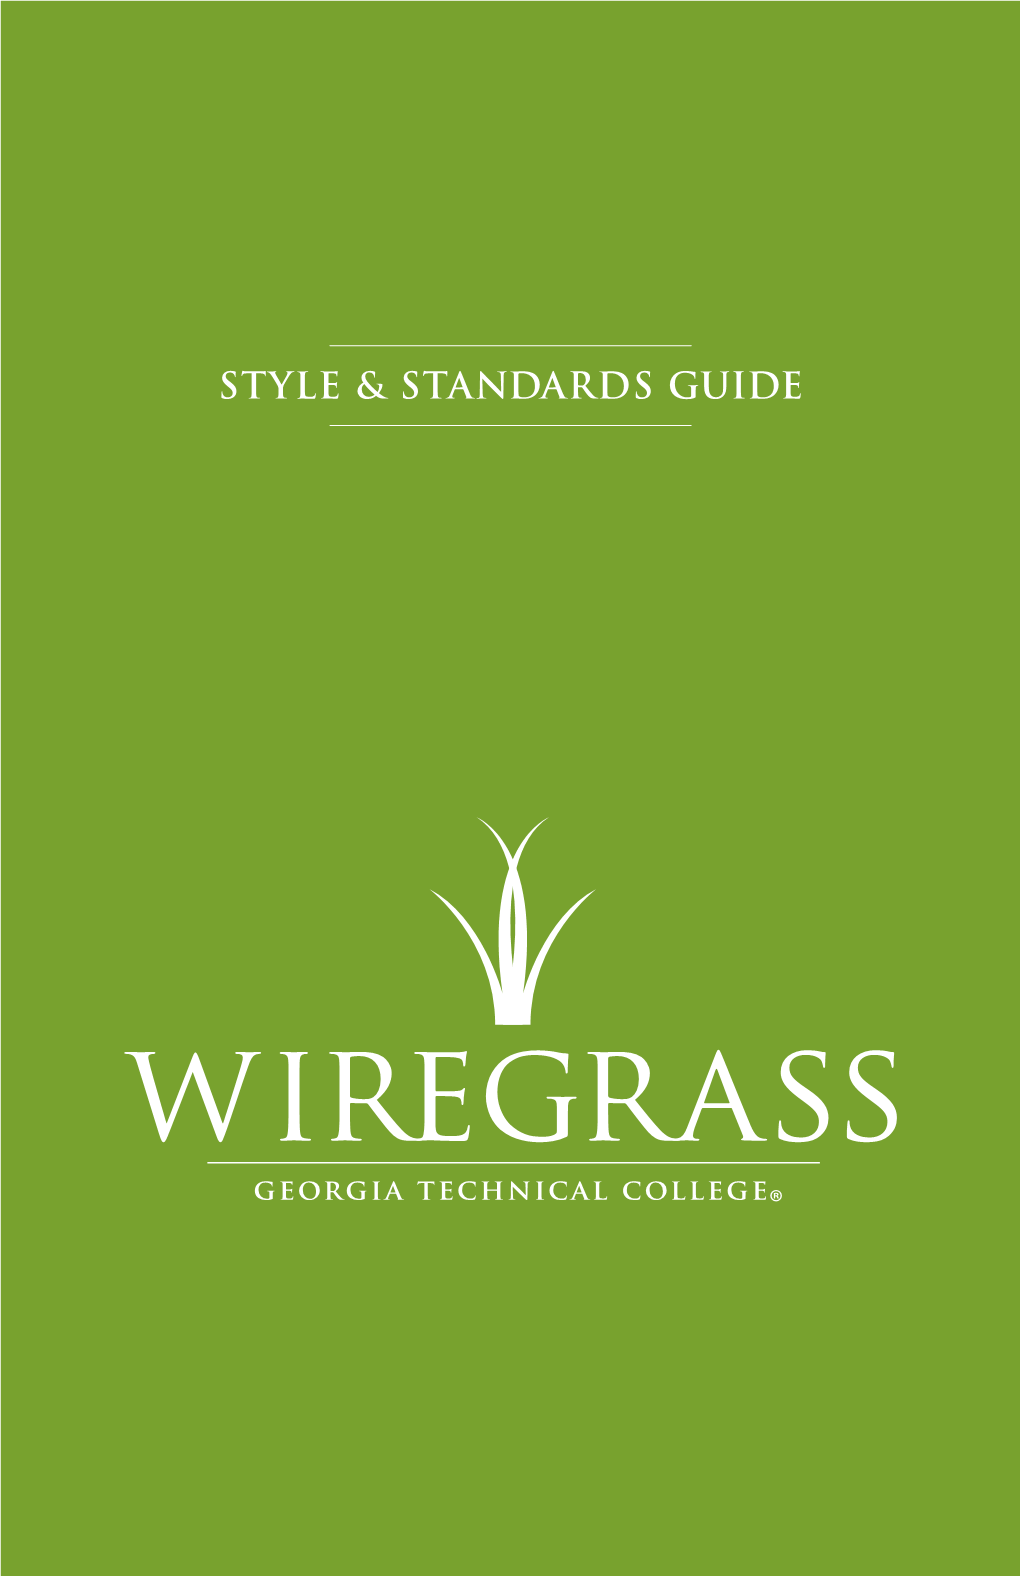 Wiregrass Style & Standards Guide